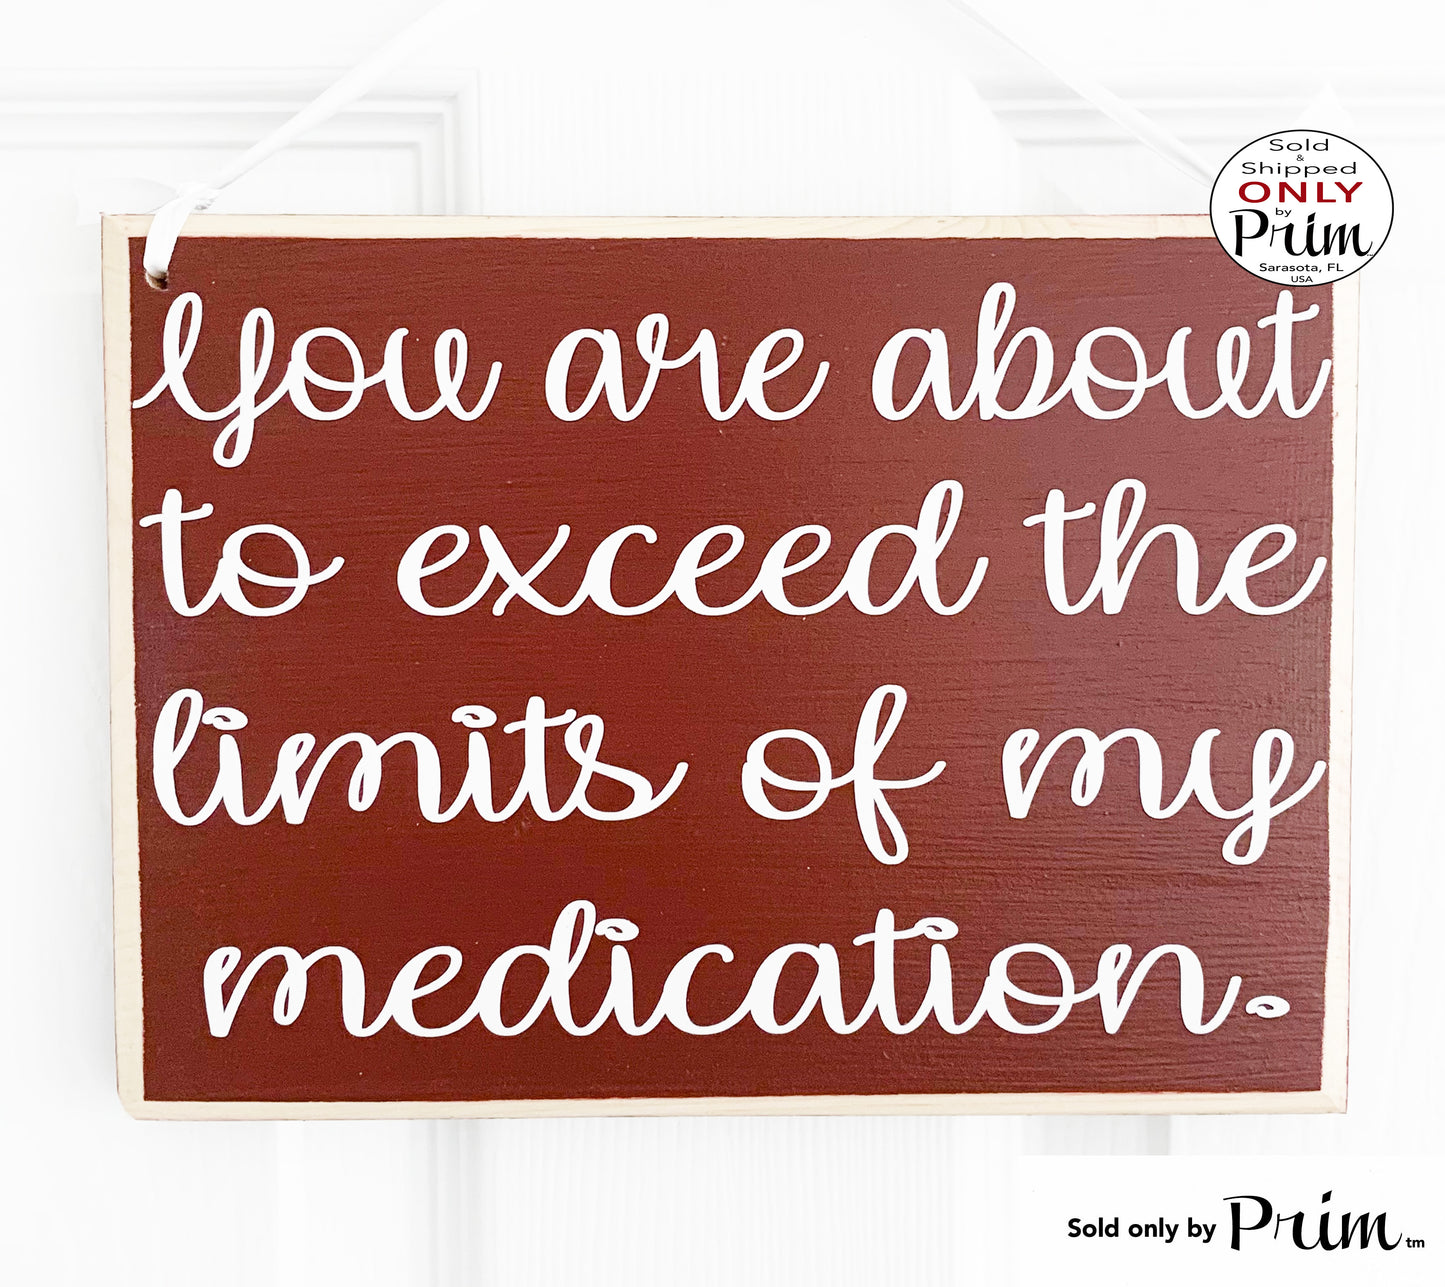 Designs by Prim 10x8 You are about to exceed the limits of my medication Custom Wood Sign Funny Patience Don't Bother Me Mom Life Aunt Monkeys Circus Plaque